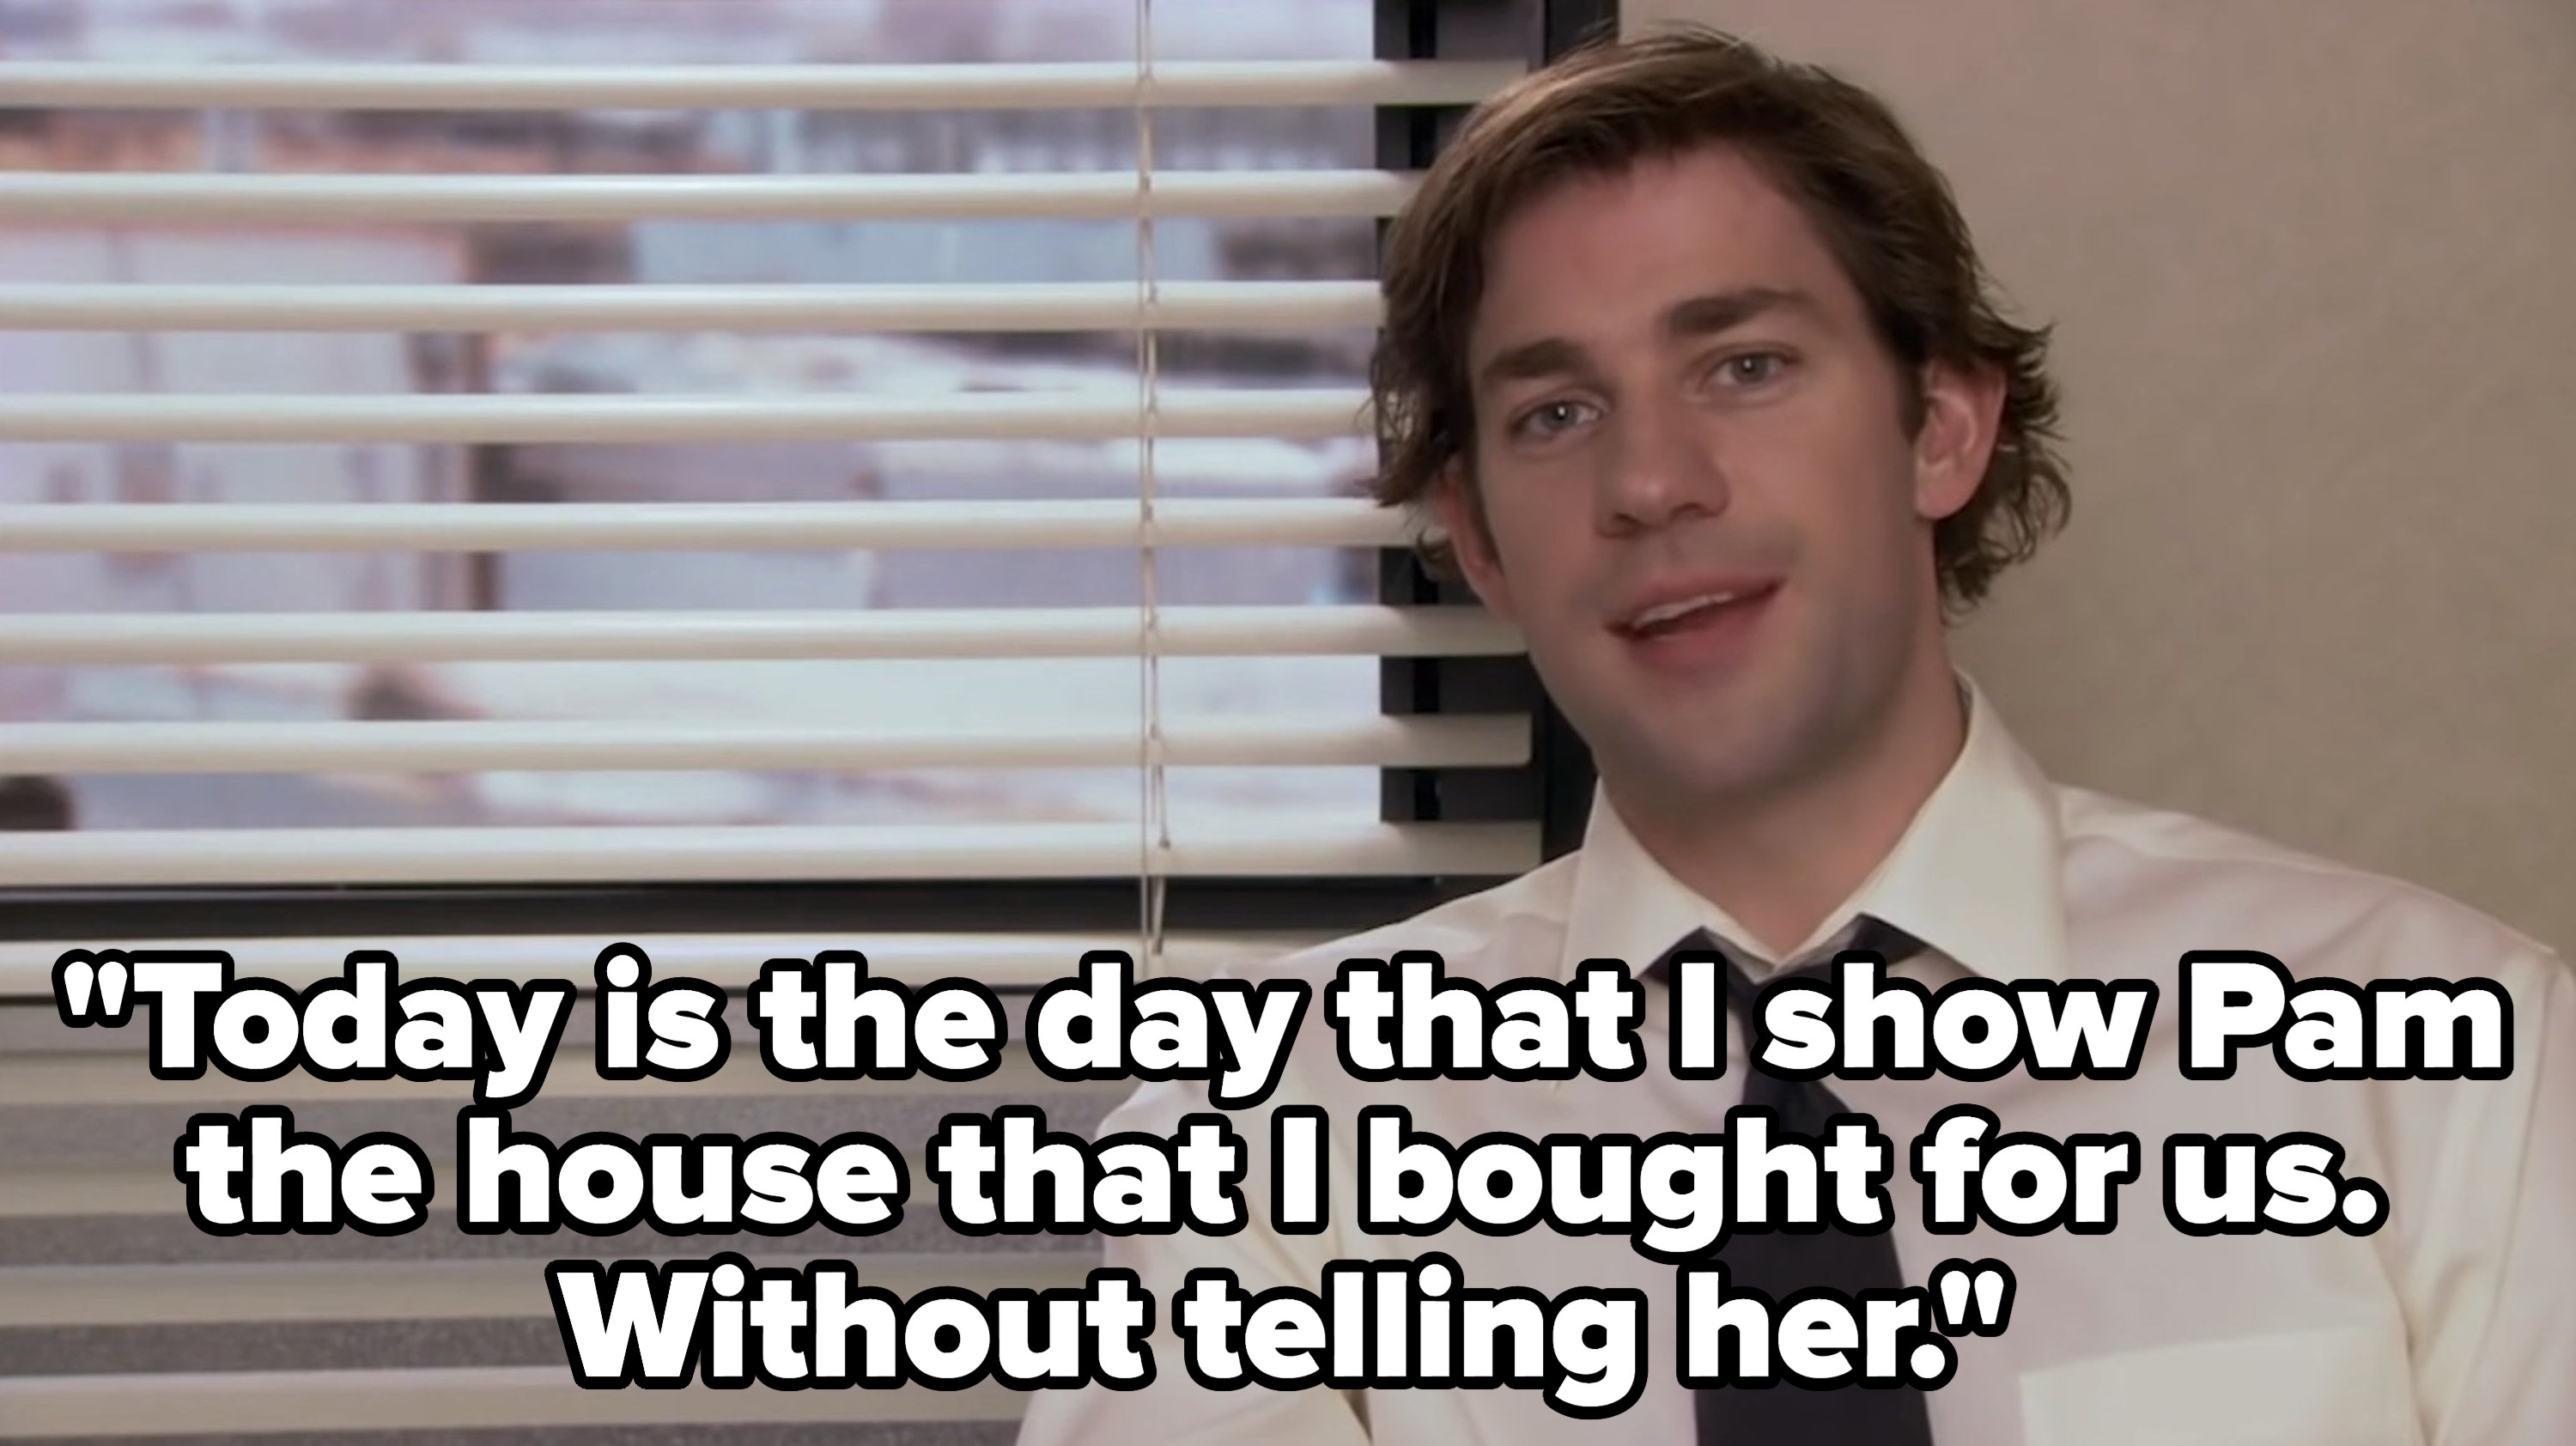 jim halpert saying today is the day that I show Pam the house that I bought for us without telling her